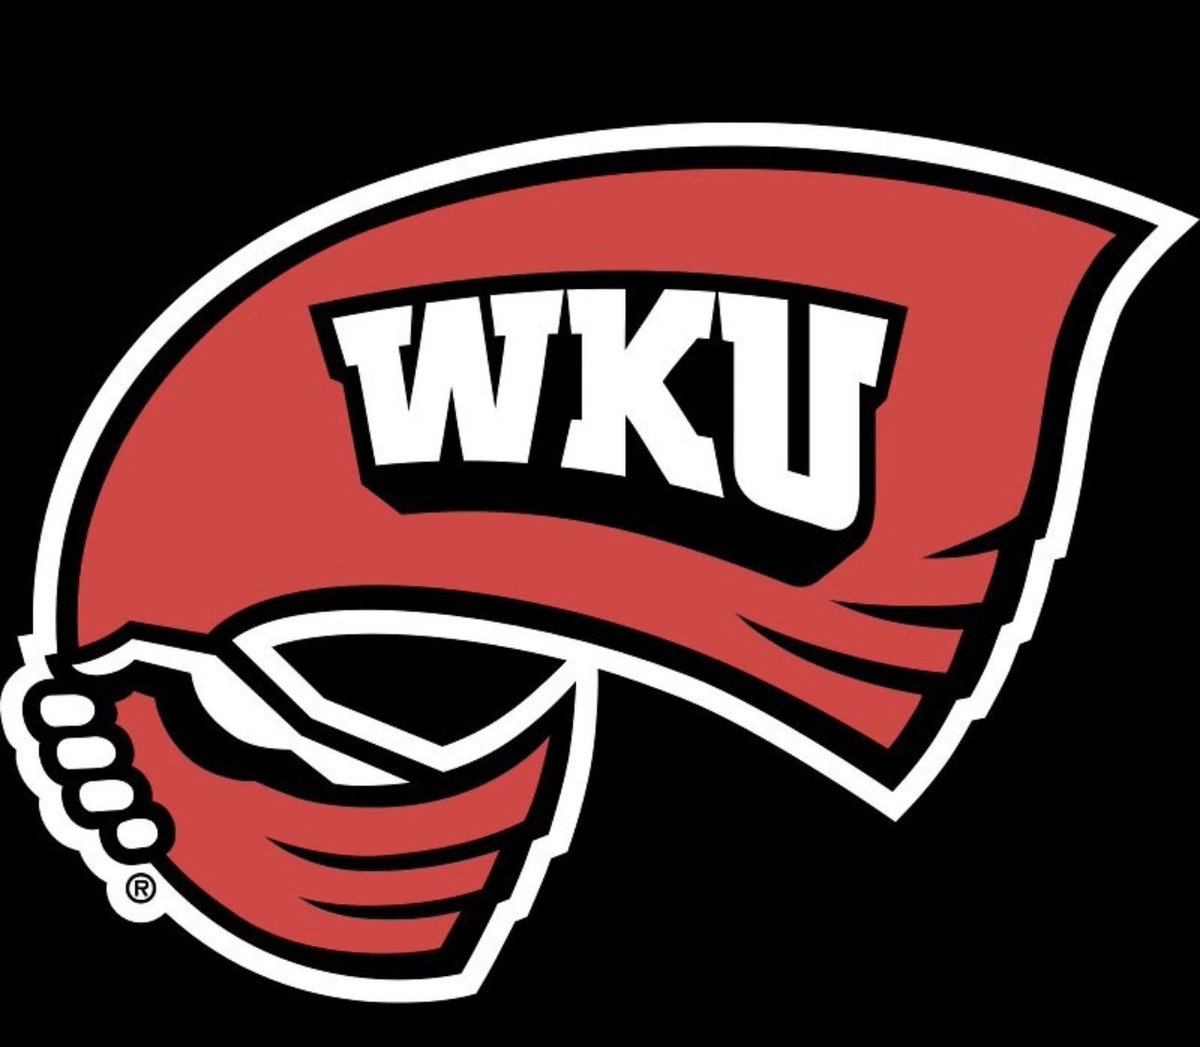 I am extremely blessed and humbled to say that I have received an offer from Western Kentucky University @WKUFootball @CoachDBrown27 @LacedfactDreams @adamgorney @demetricDWarren @TheUCReport @Scott_Schrader @Zack_poff_MP @GregBiggins @dzoloty @BrandonHuffman @CoachKiddIMG